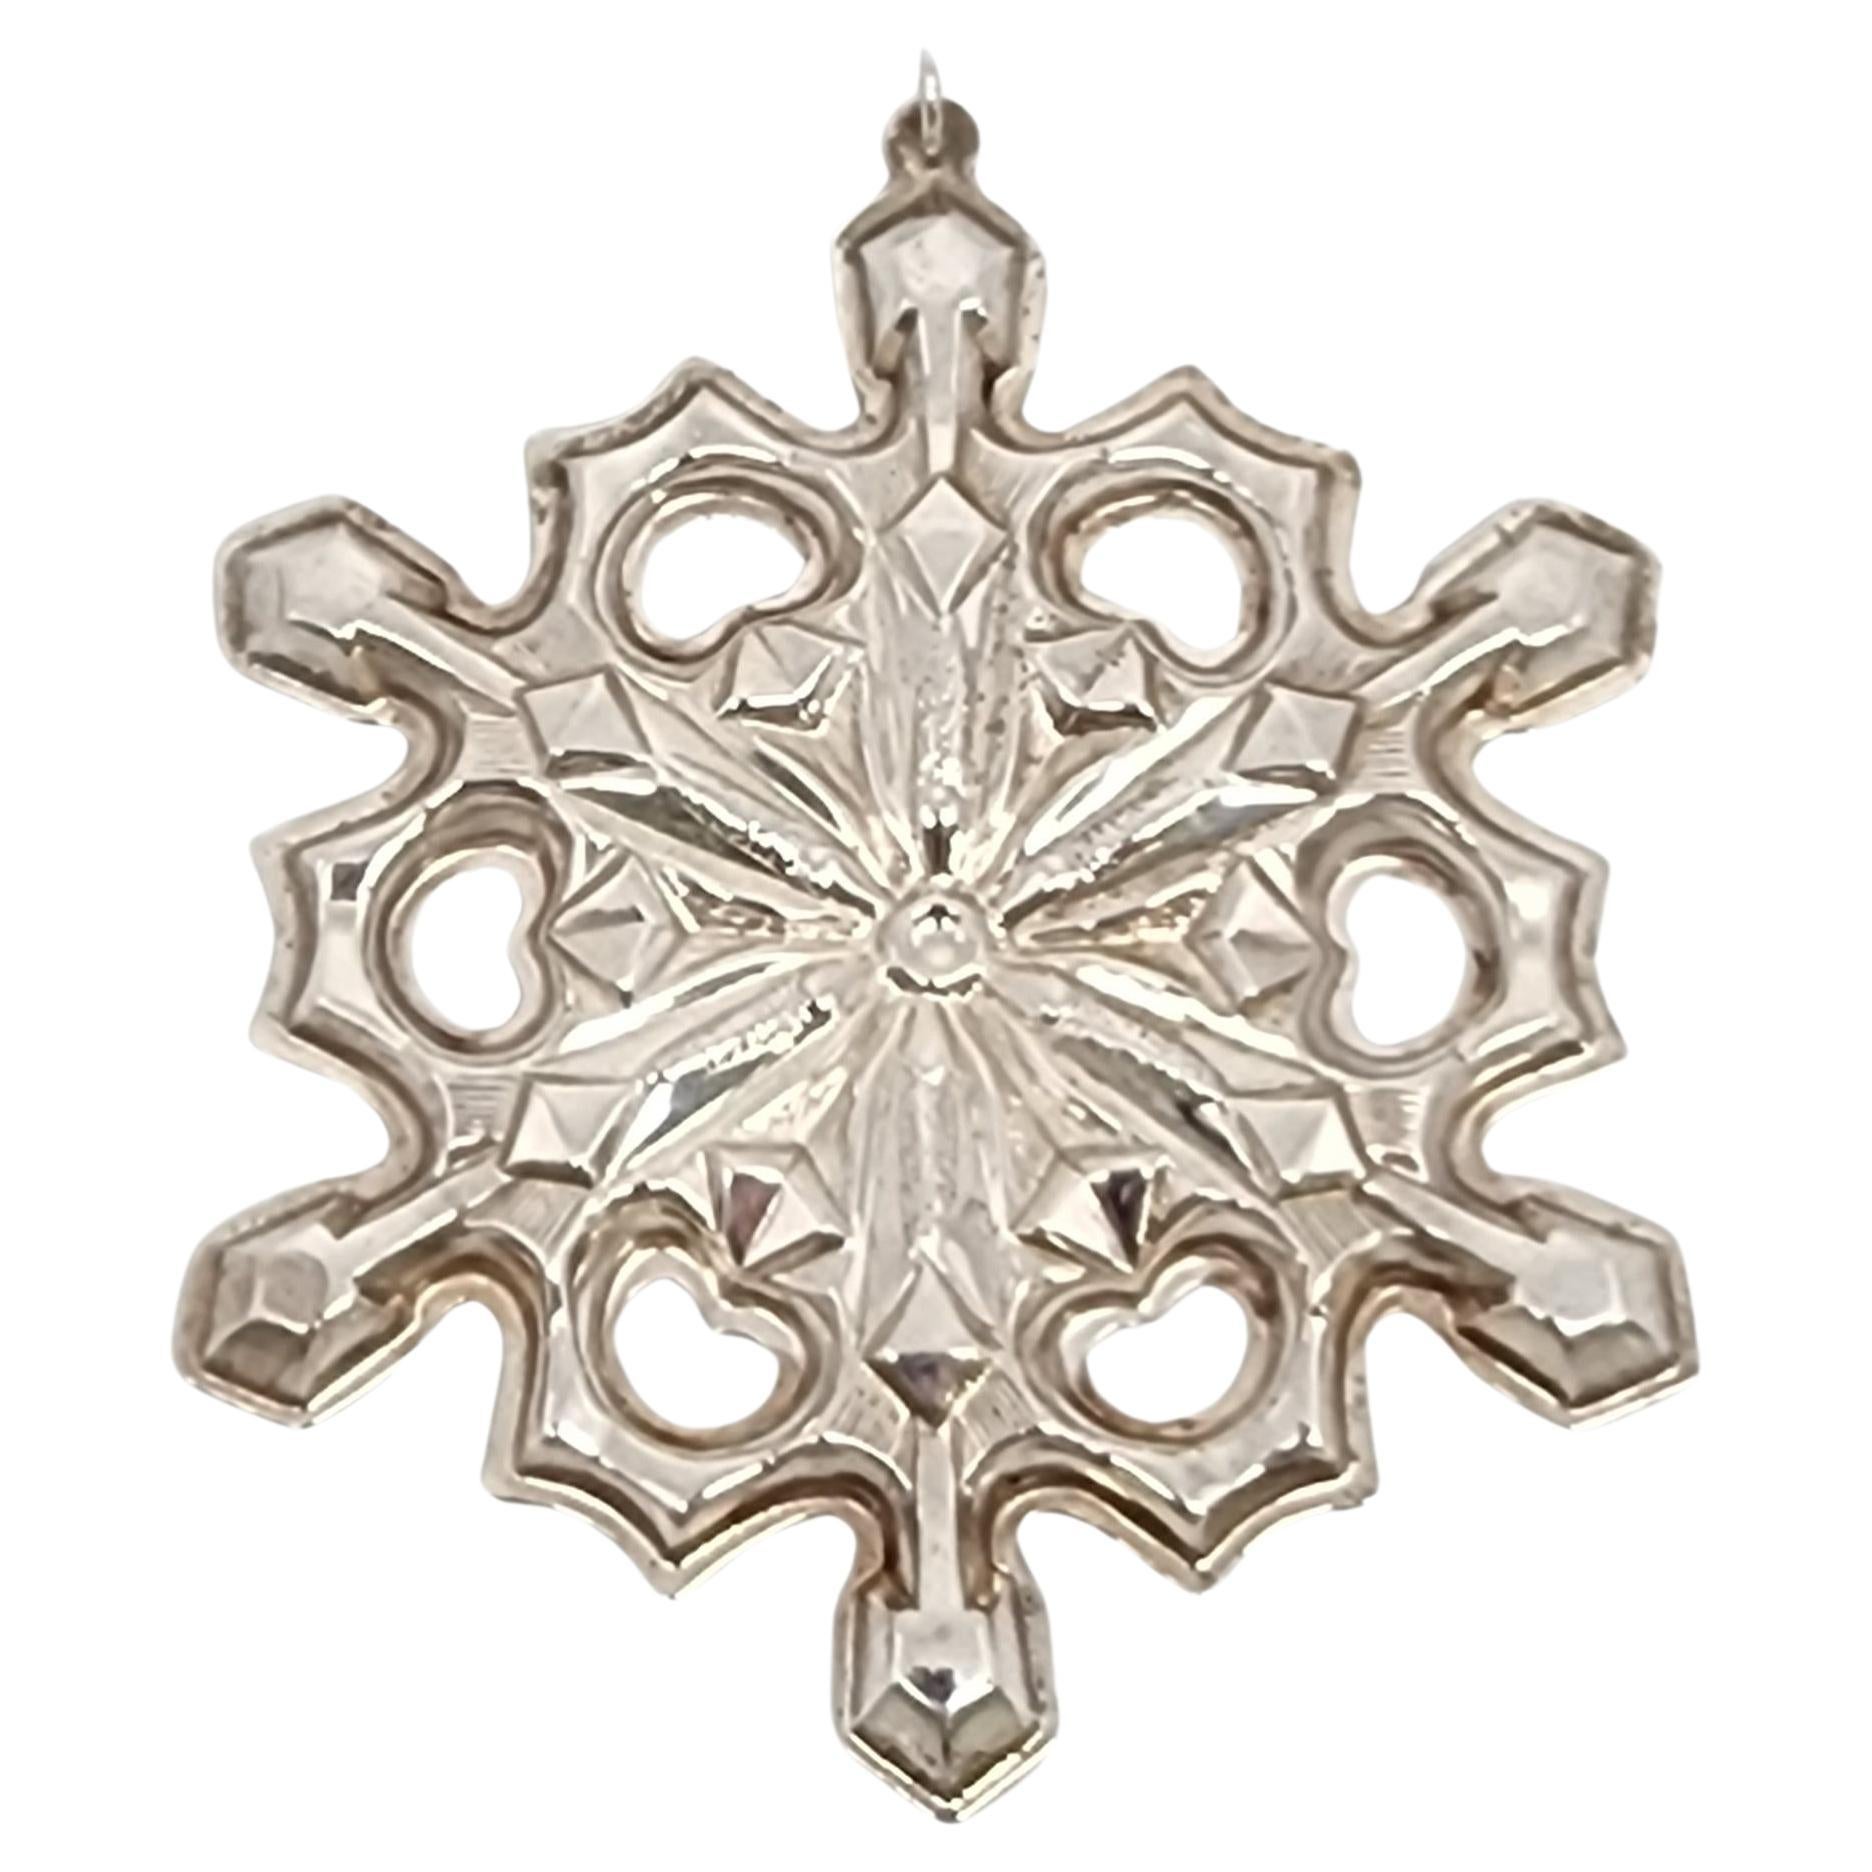 1979 Gorham Sterling Silver Snowflake Ornament #15644 For Sale